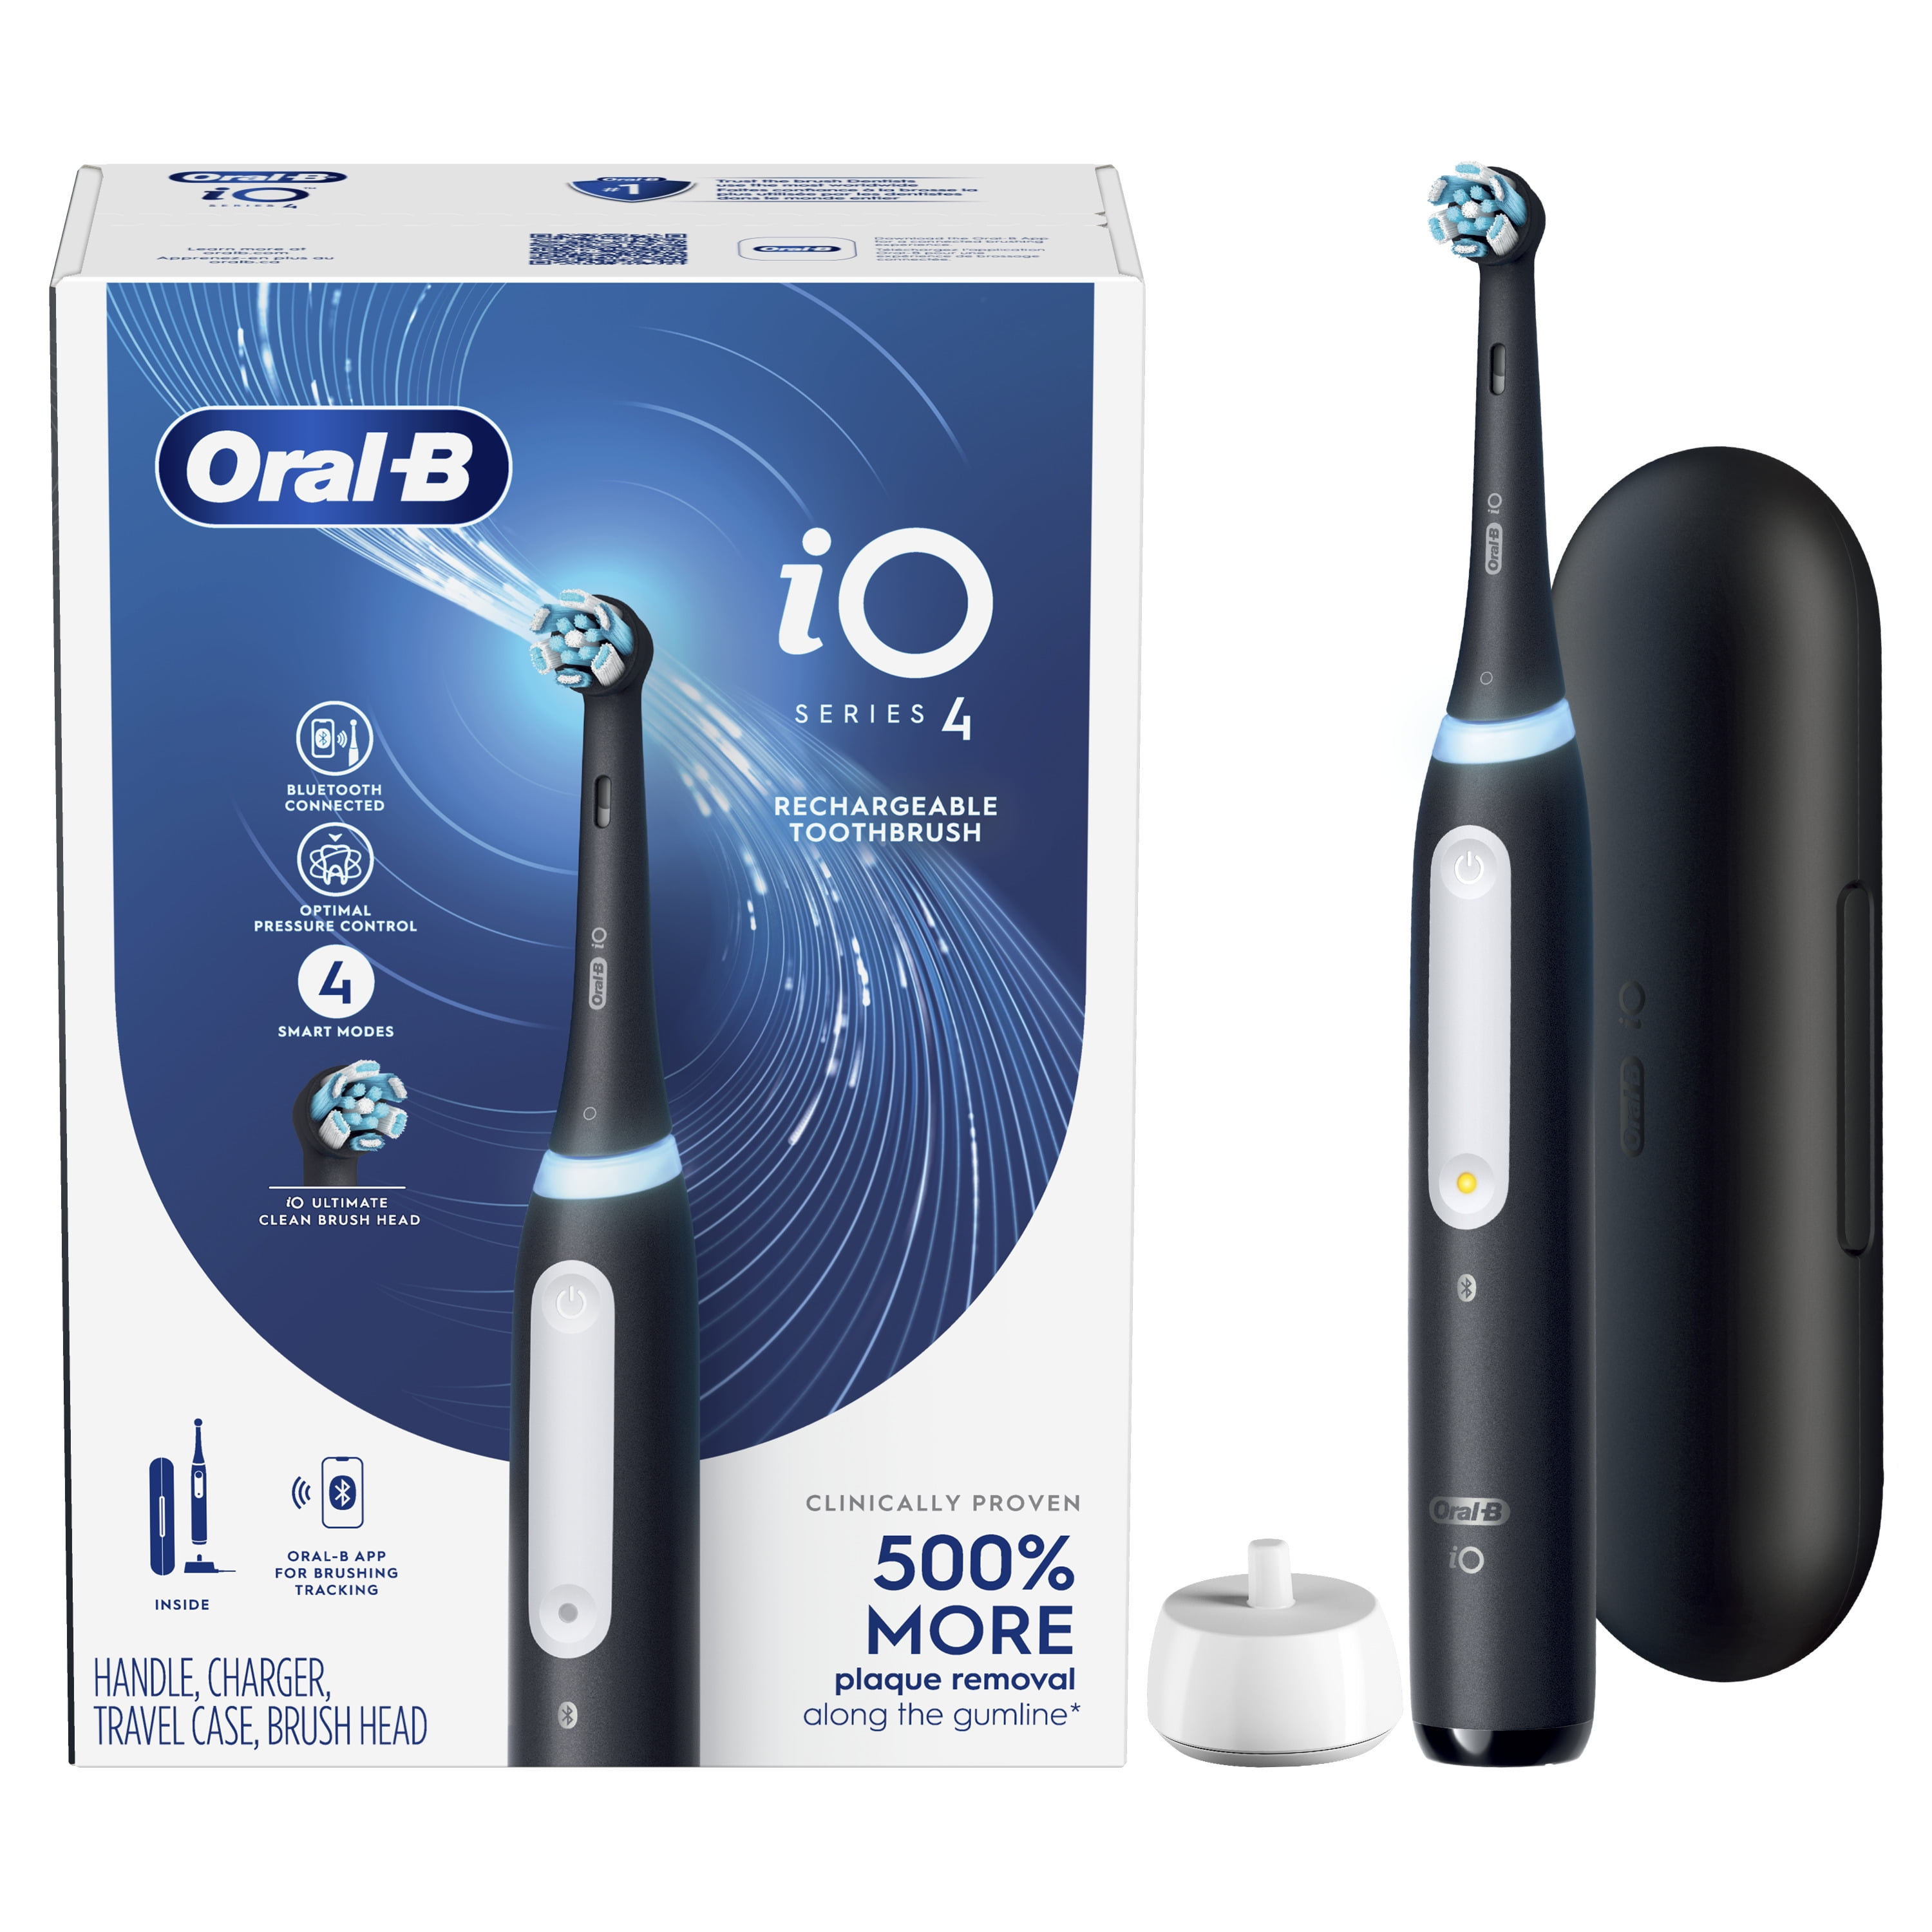 Oral-B Black Toothbrush iO Rechargeable, Electric (1) Brush with Series Head, 4